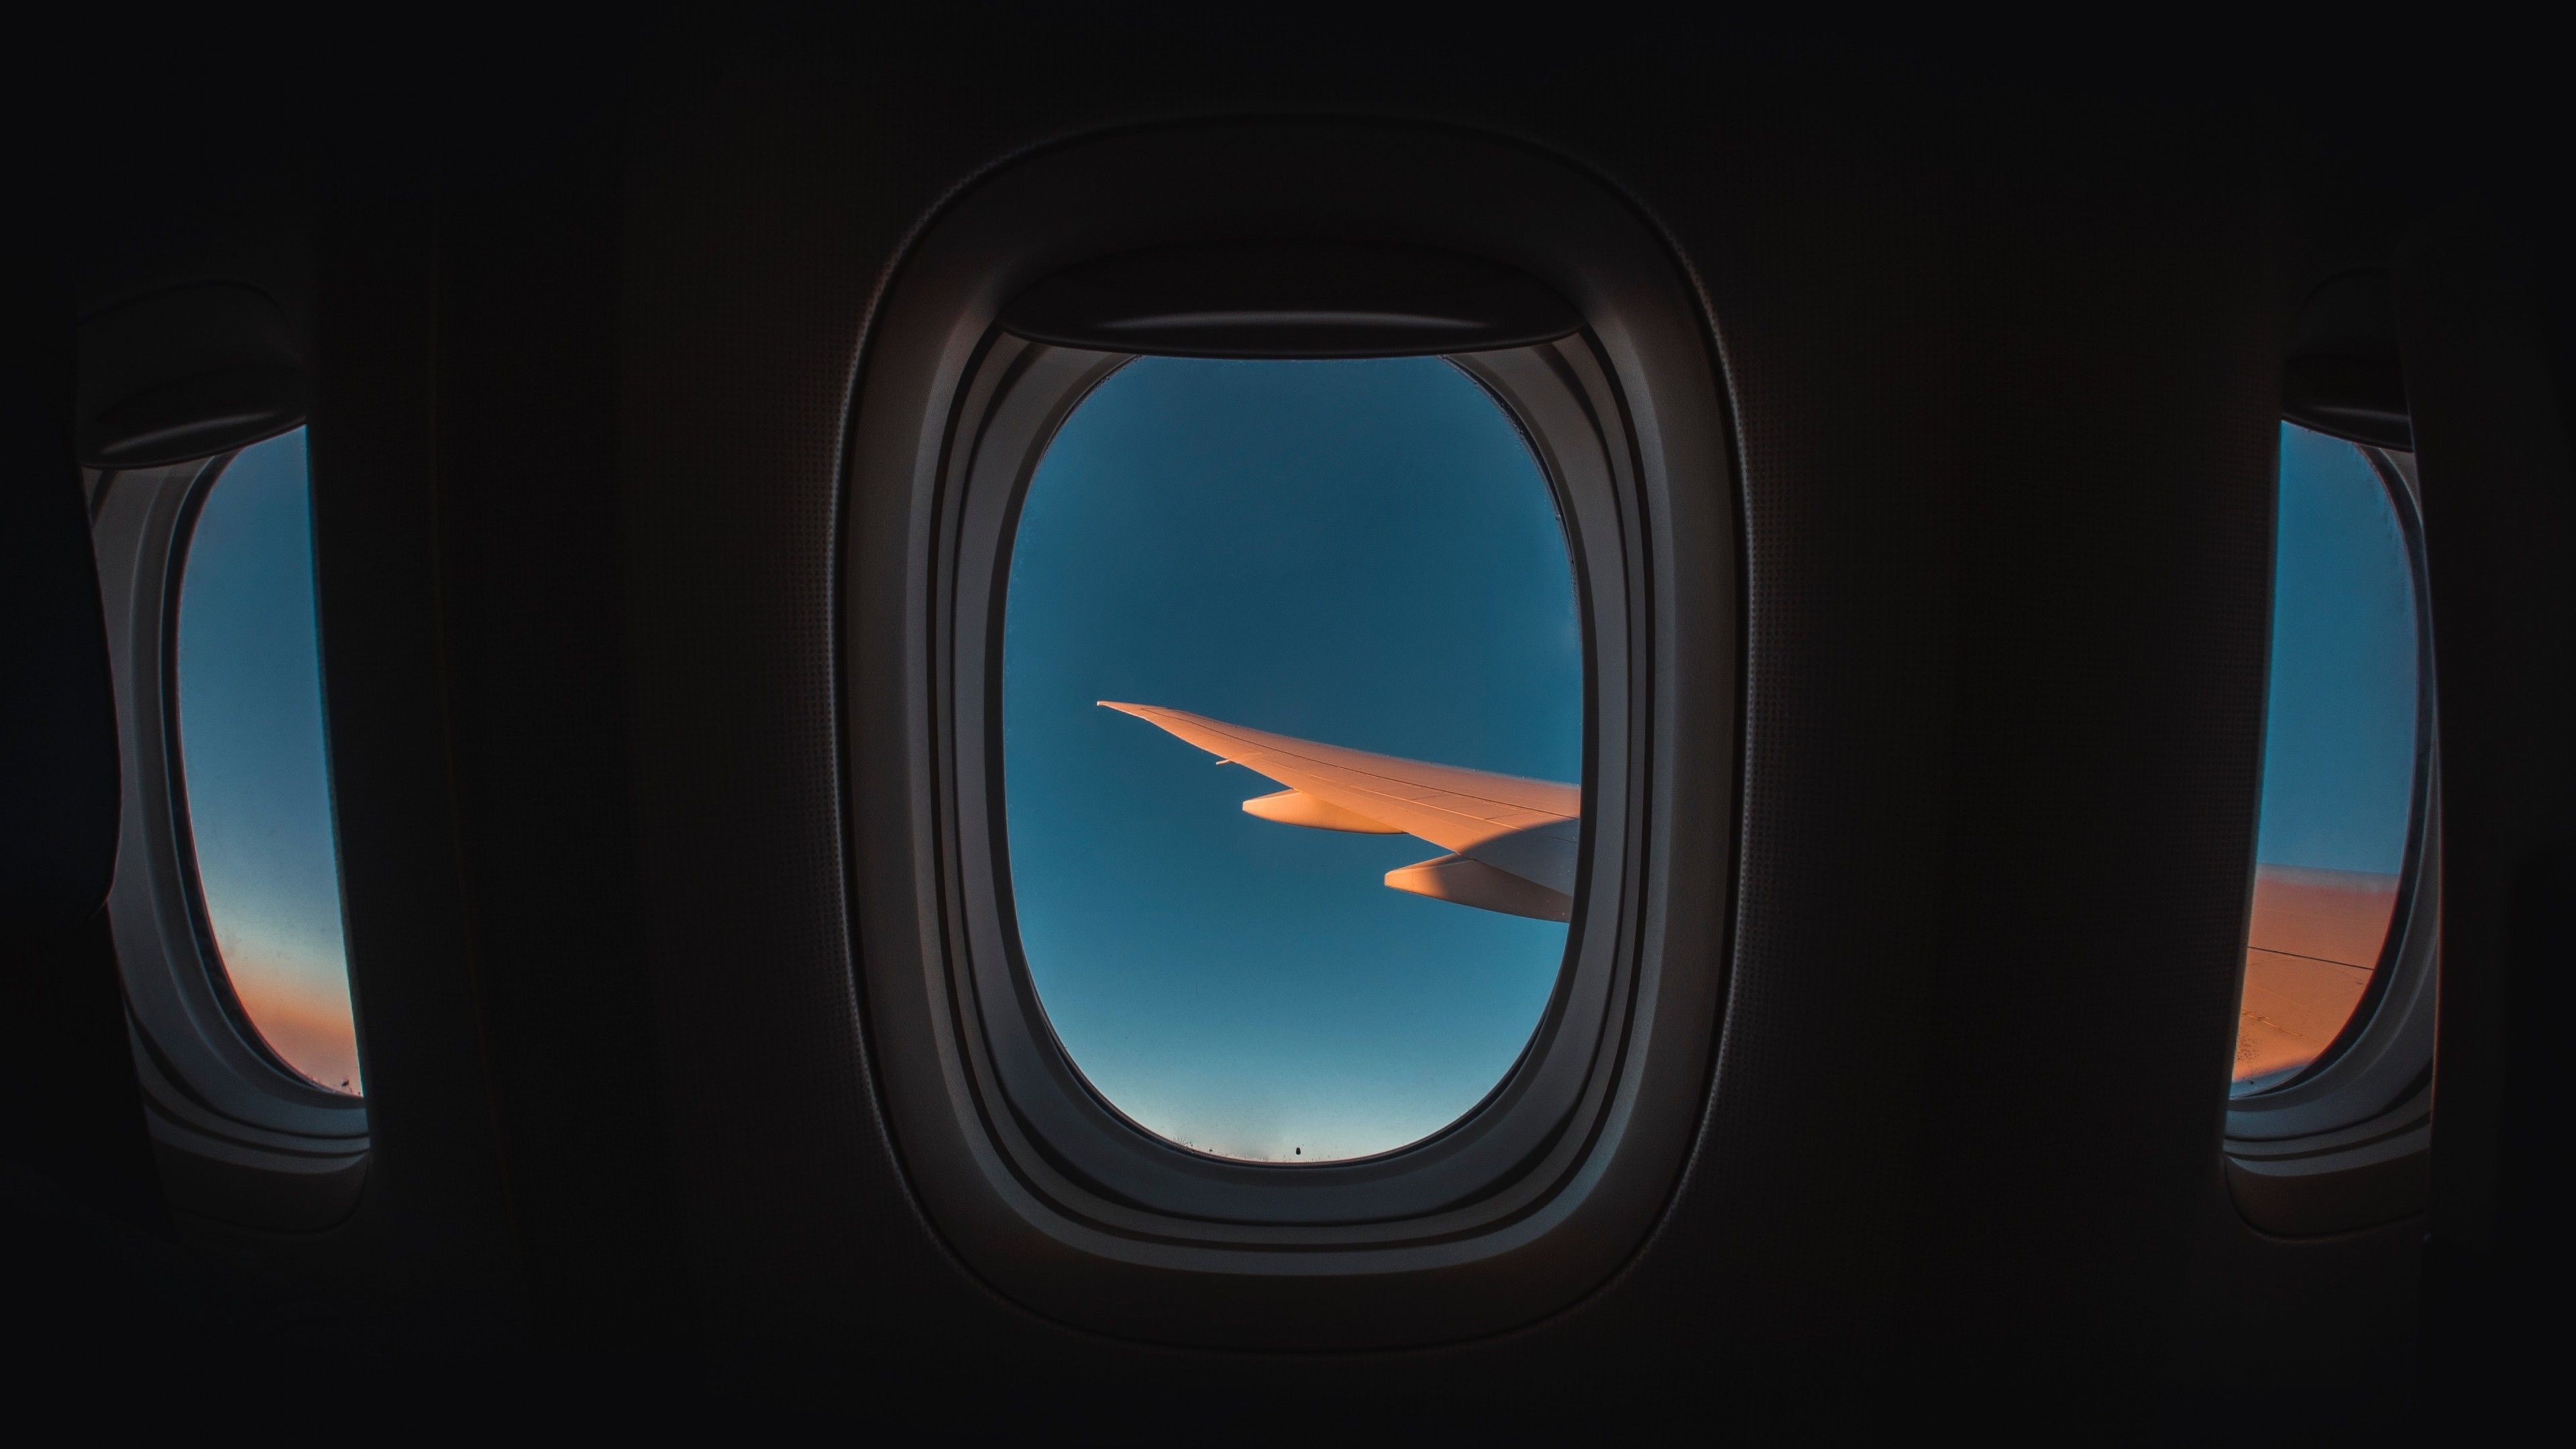 Download 3840x2160 Airplane Window, Wing, Sky Wallpaper for UHD TV